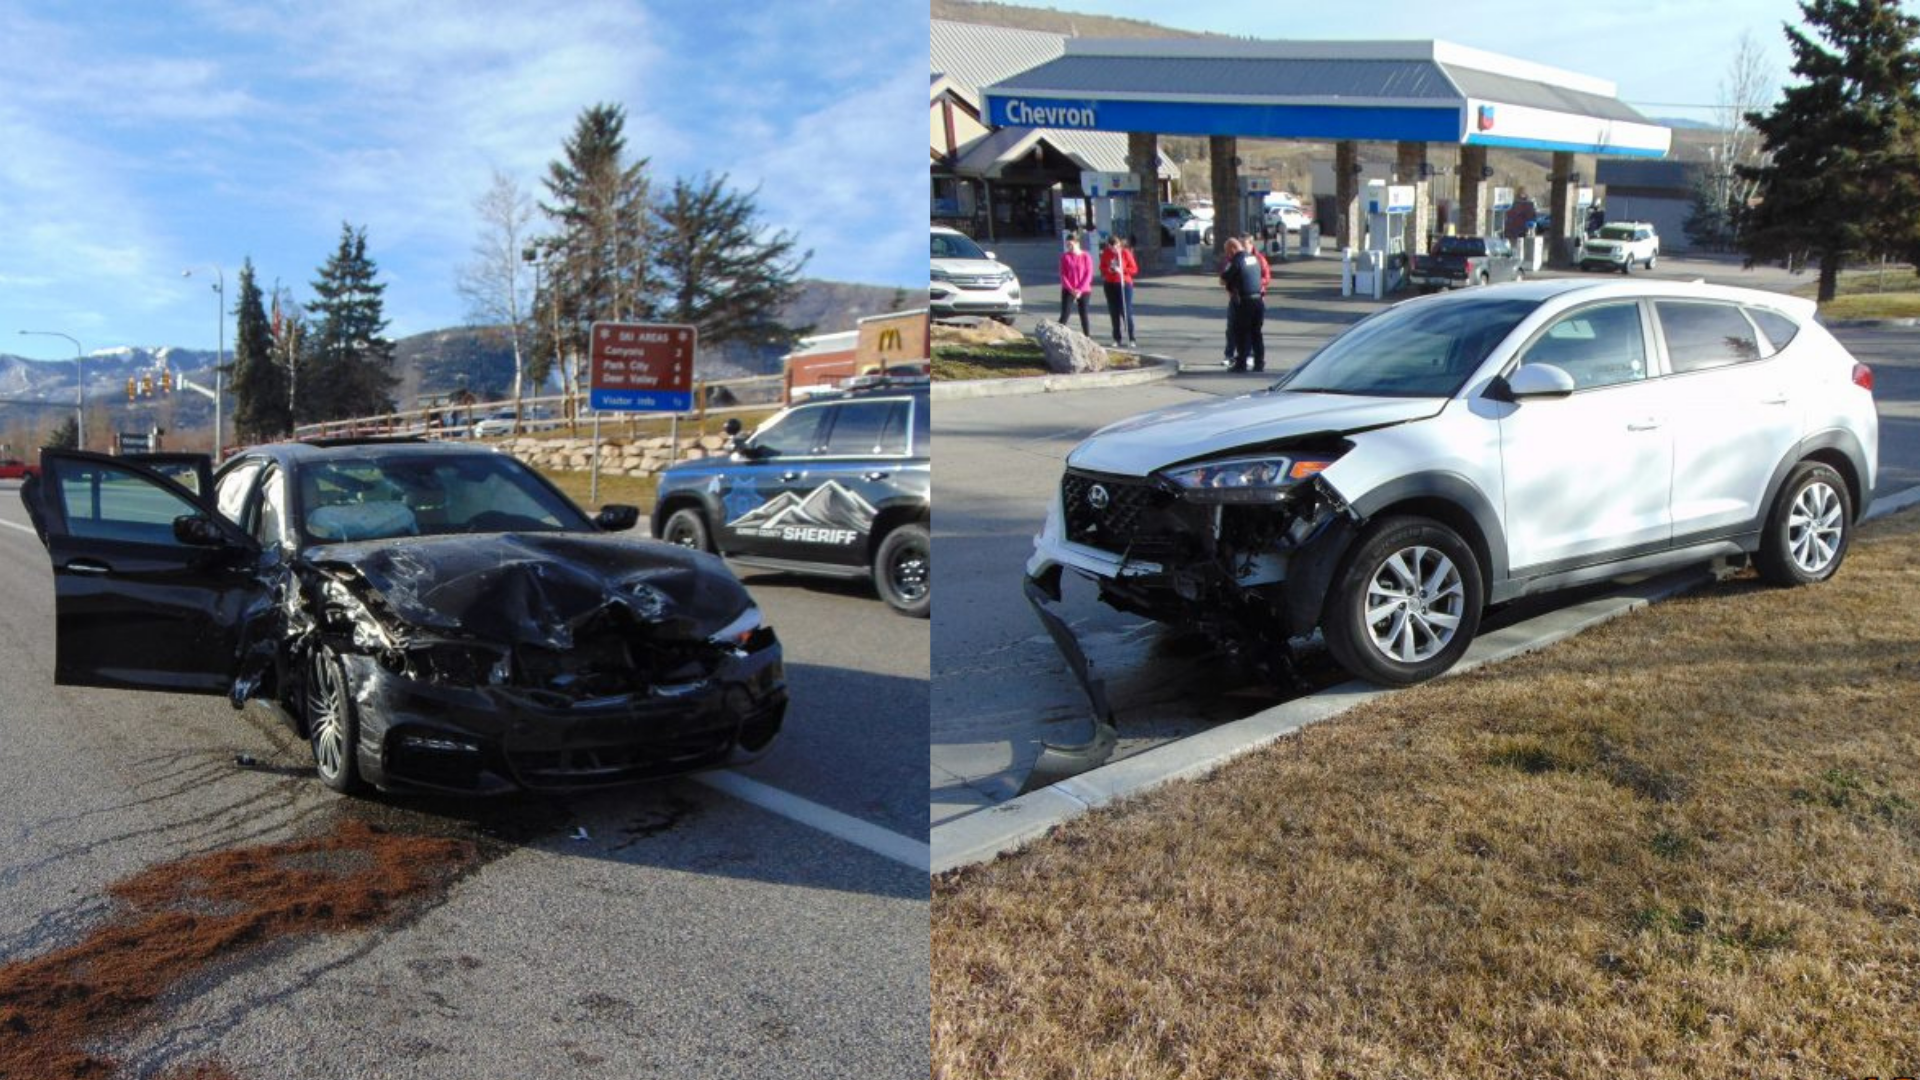 Photos of the result of the car crash....